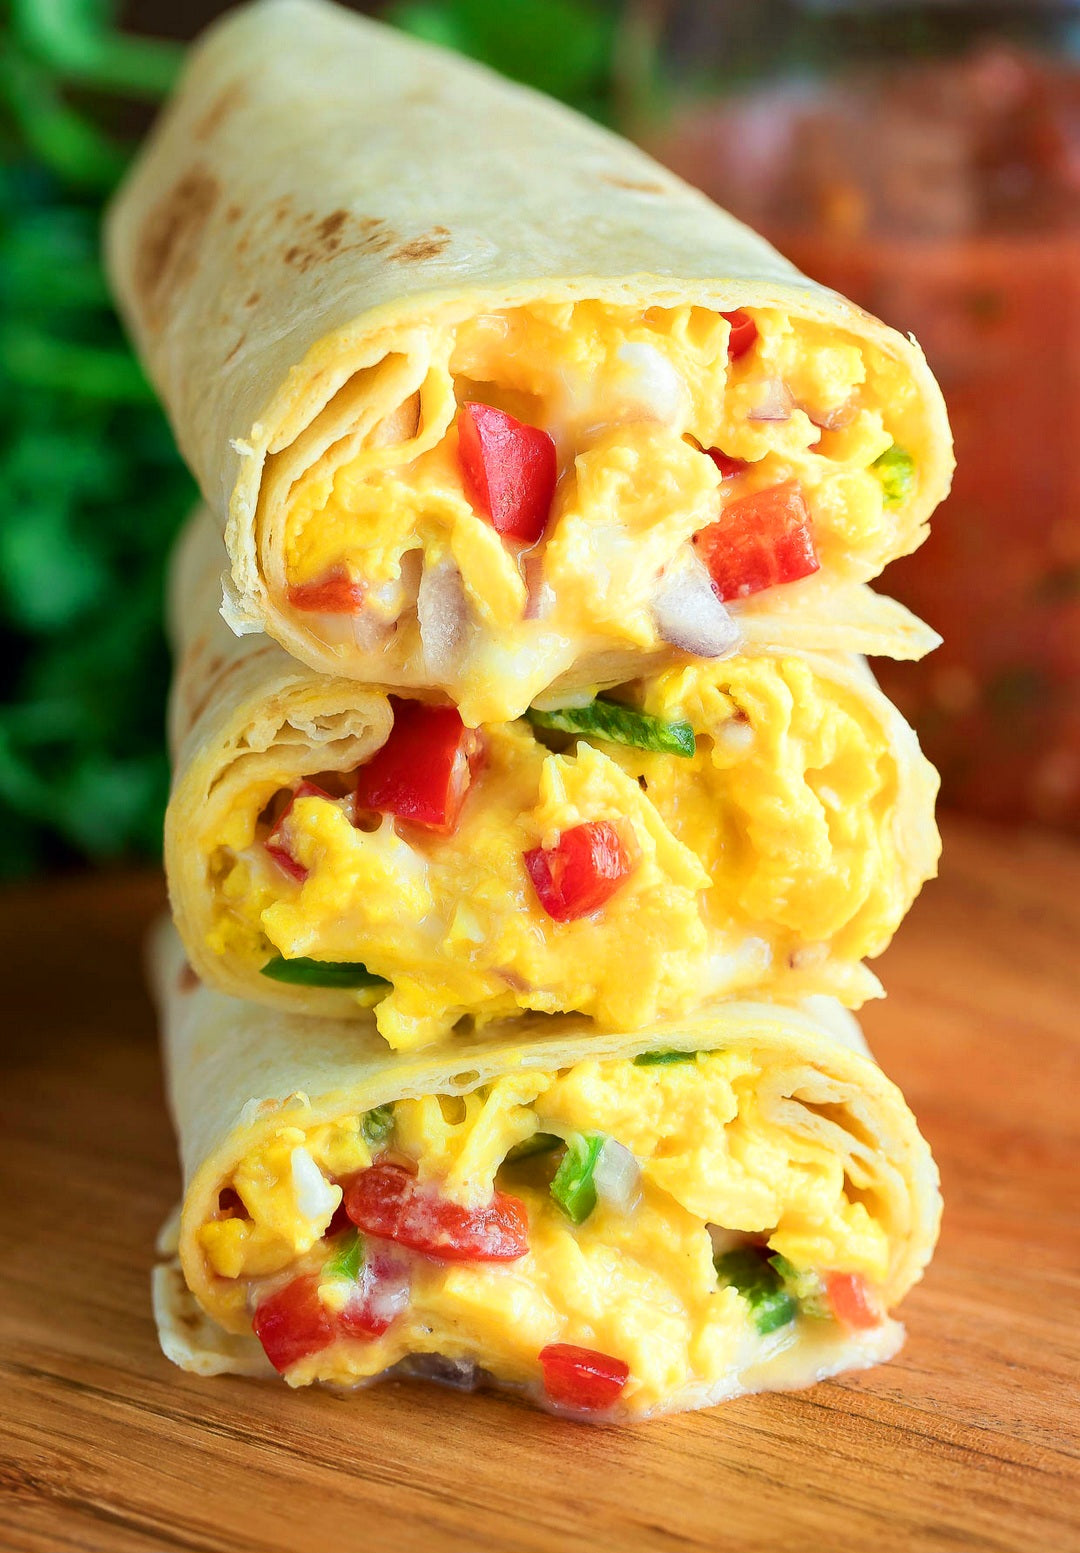 Breakfast burrito meatless with grand daddy's secret sauce